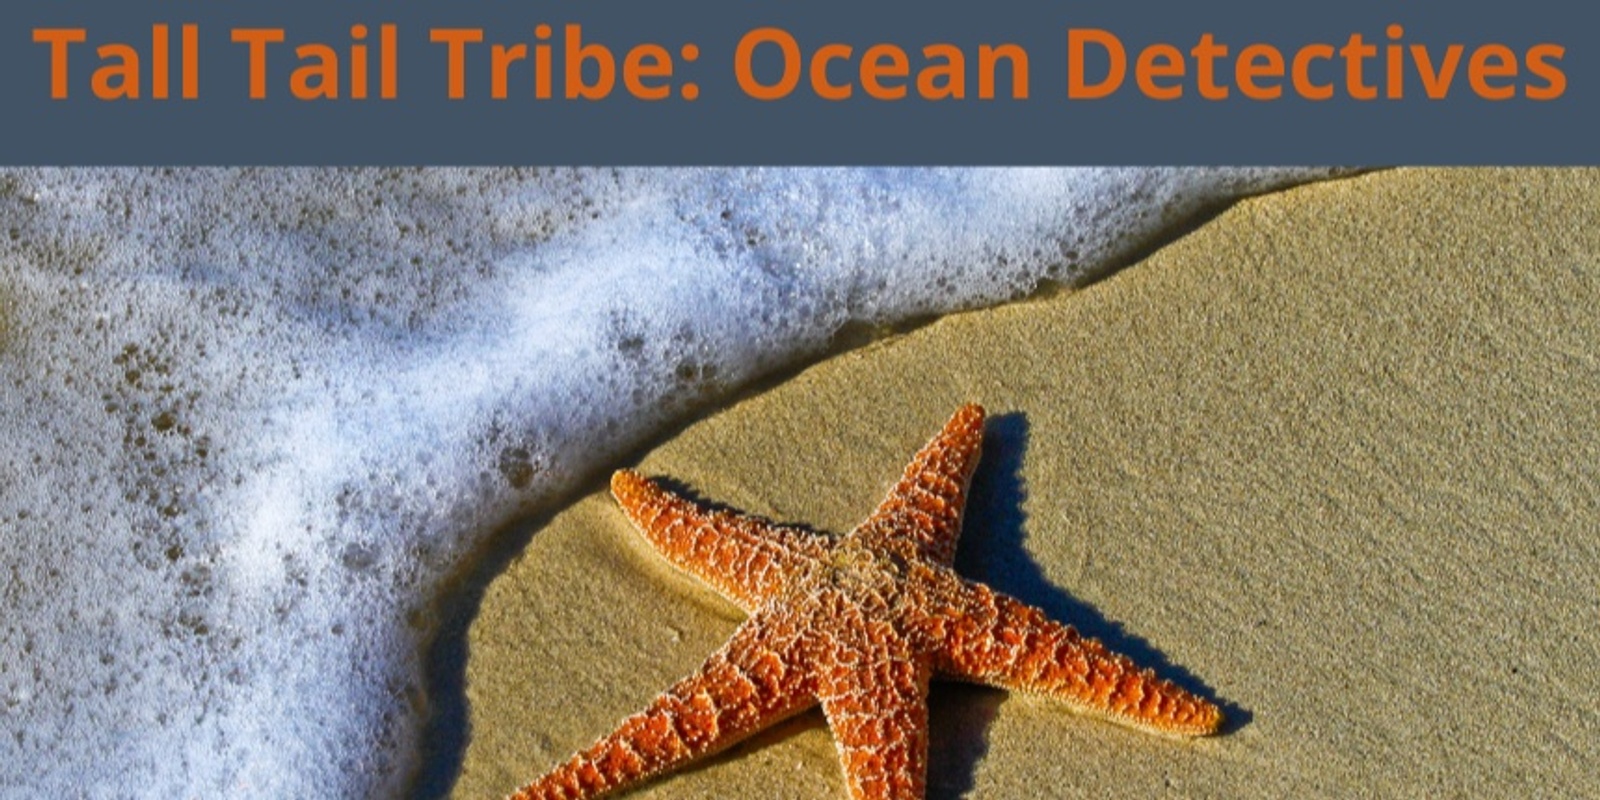 Banner image for Tall Tail Tribe: Ocean Detectives